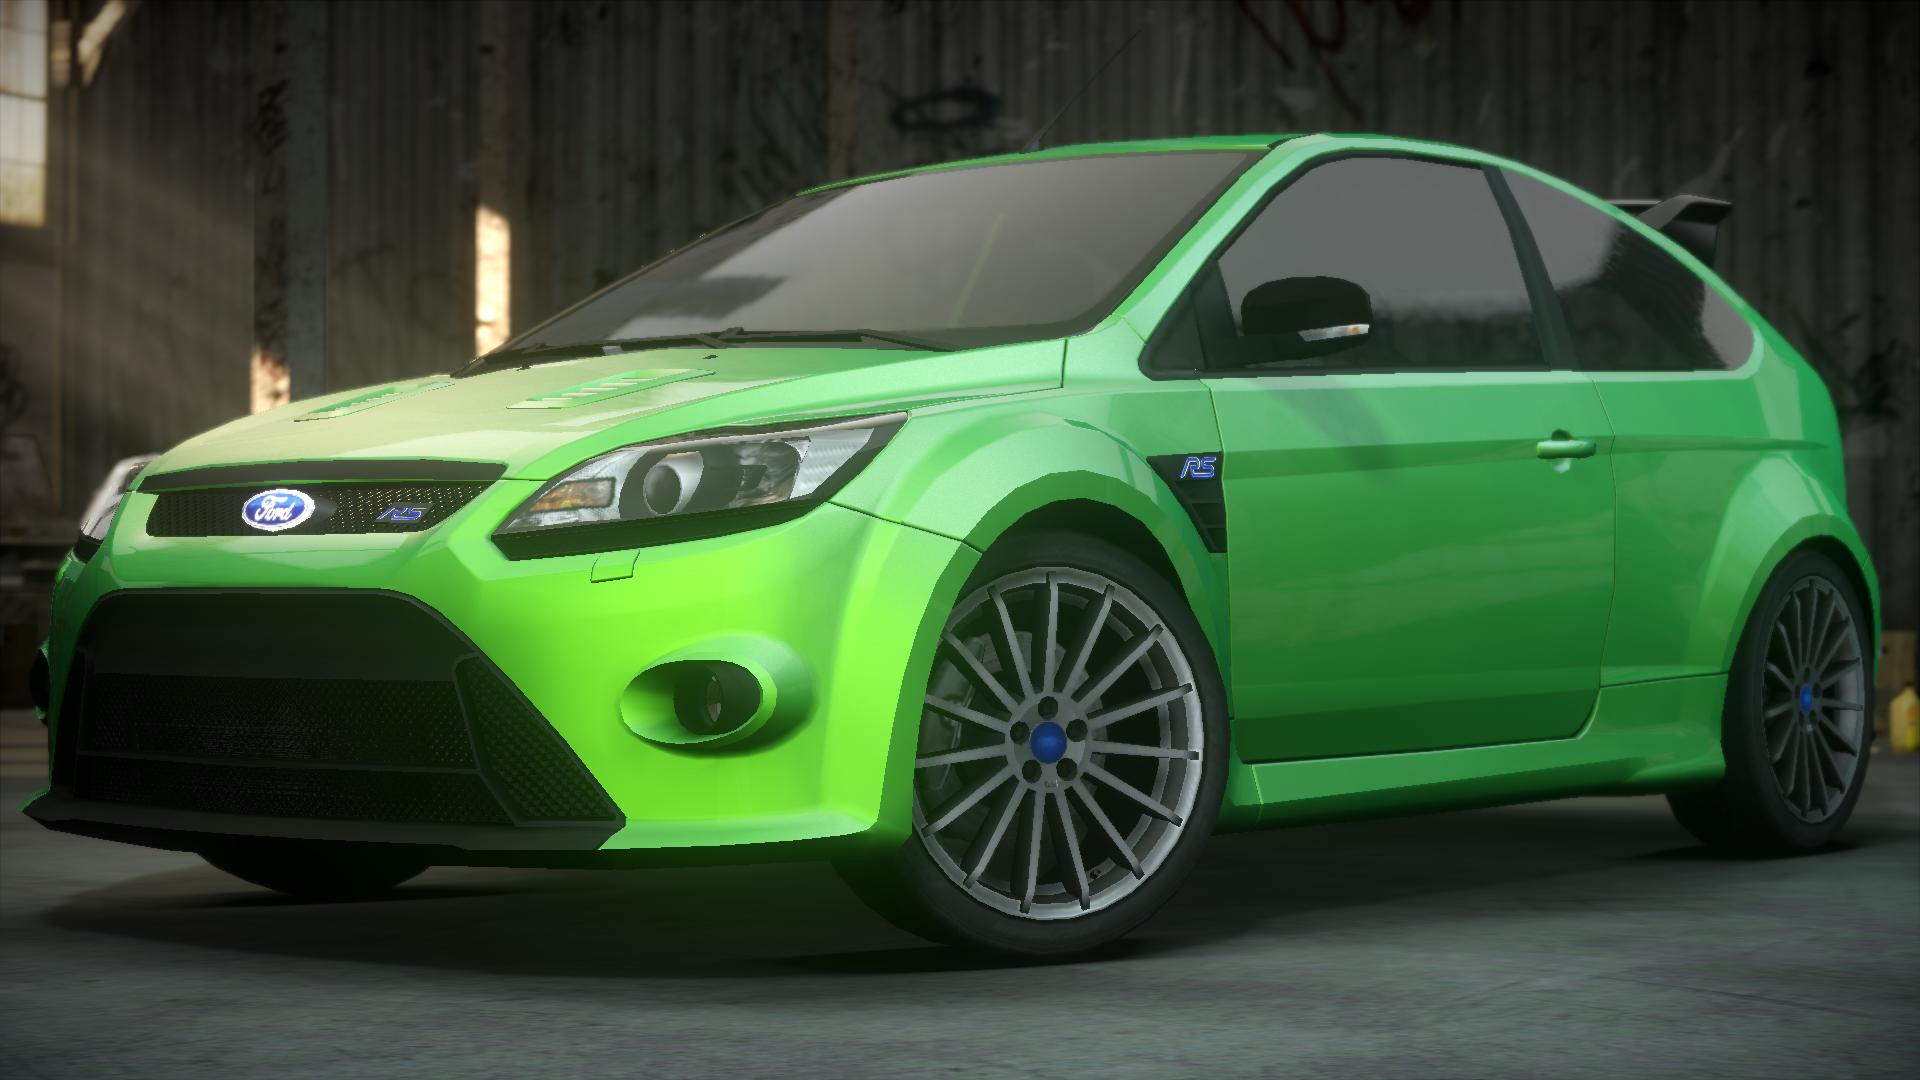 2009 Ford focus rs wiki #1